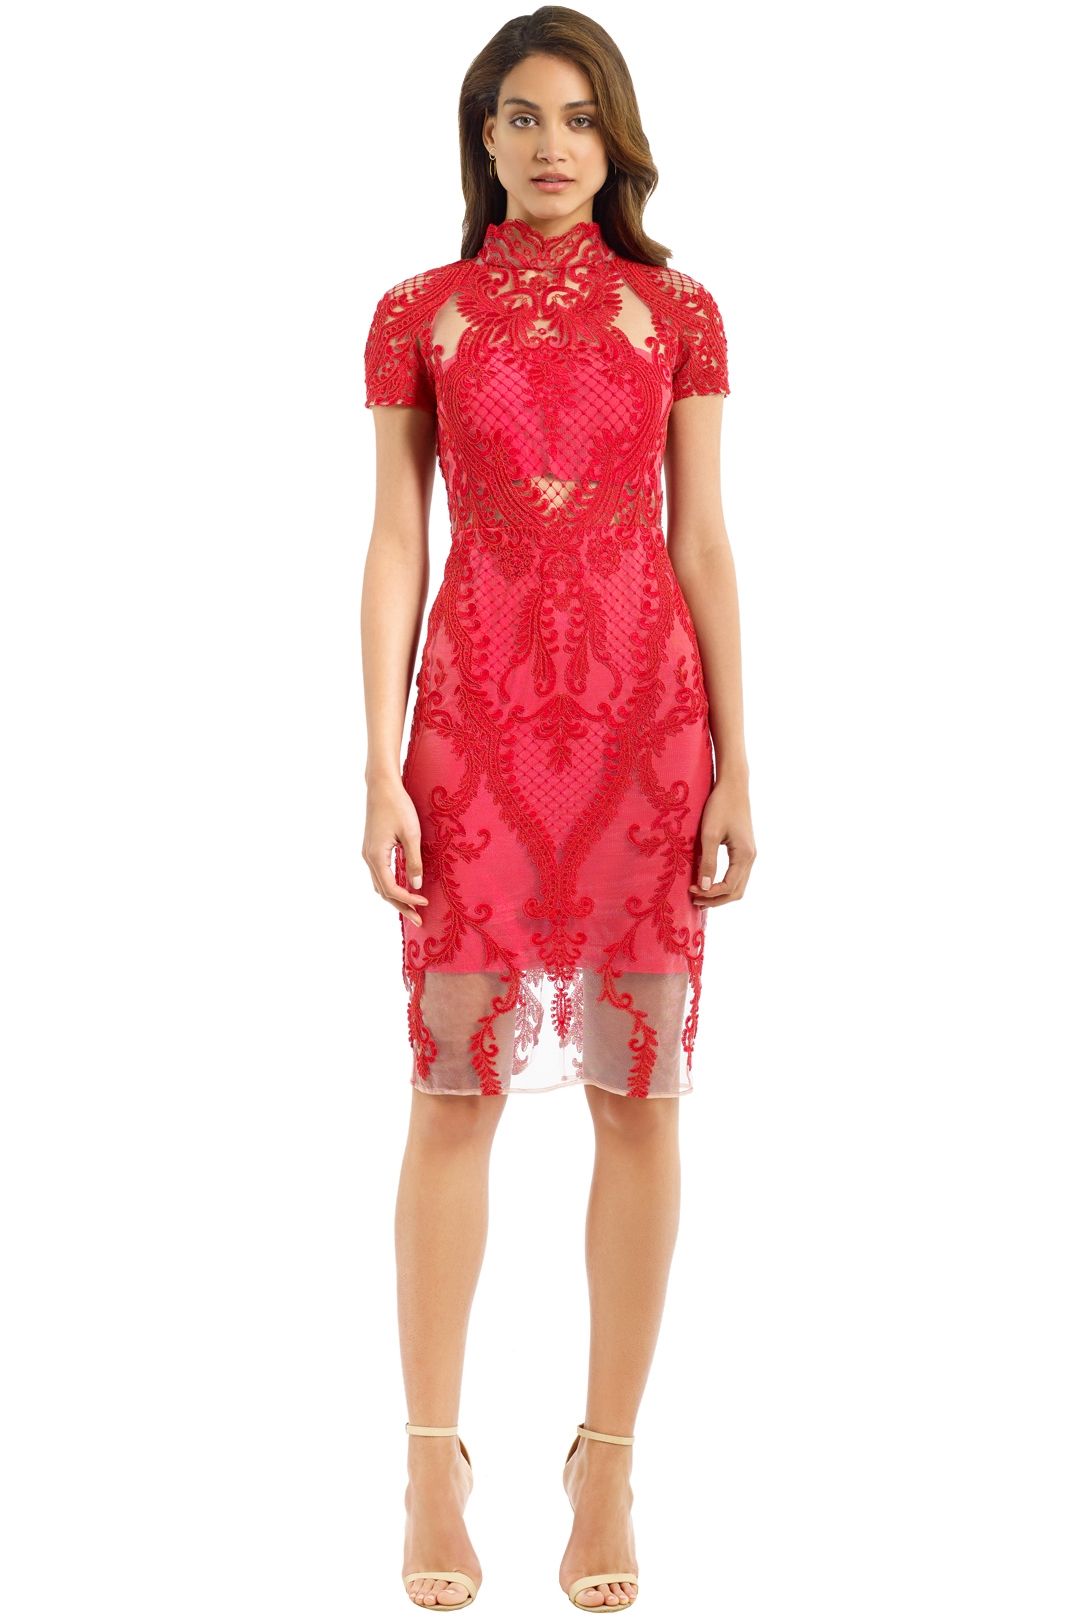 Thurley - Indianna Dress - Red - Front